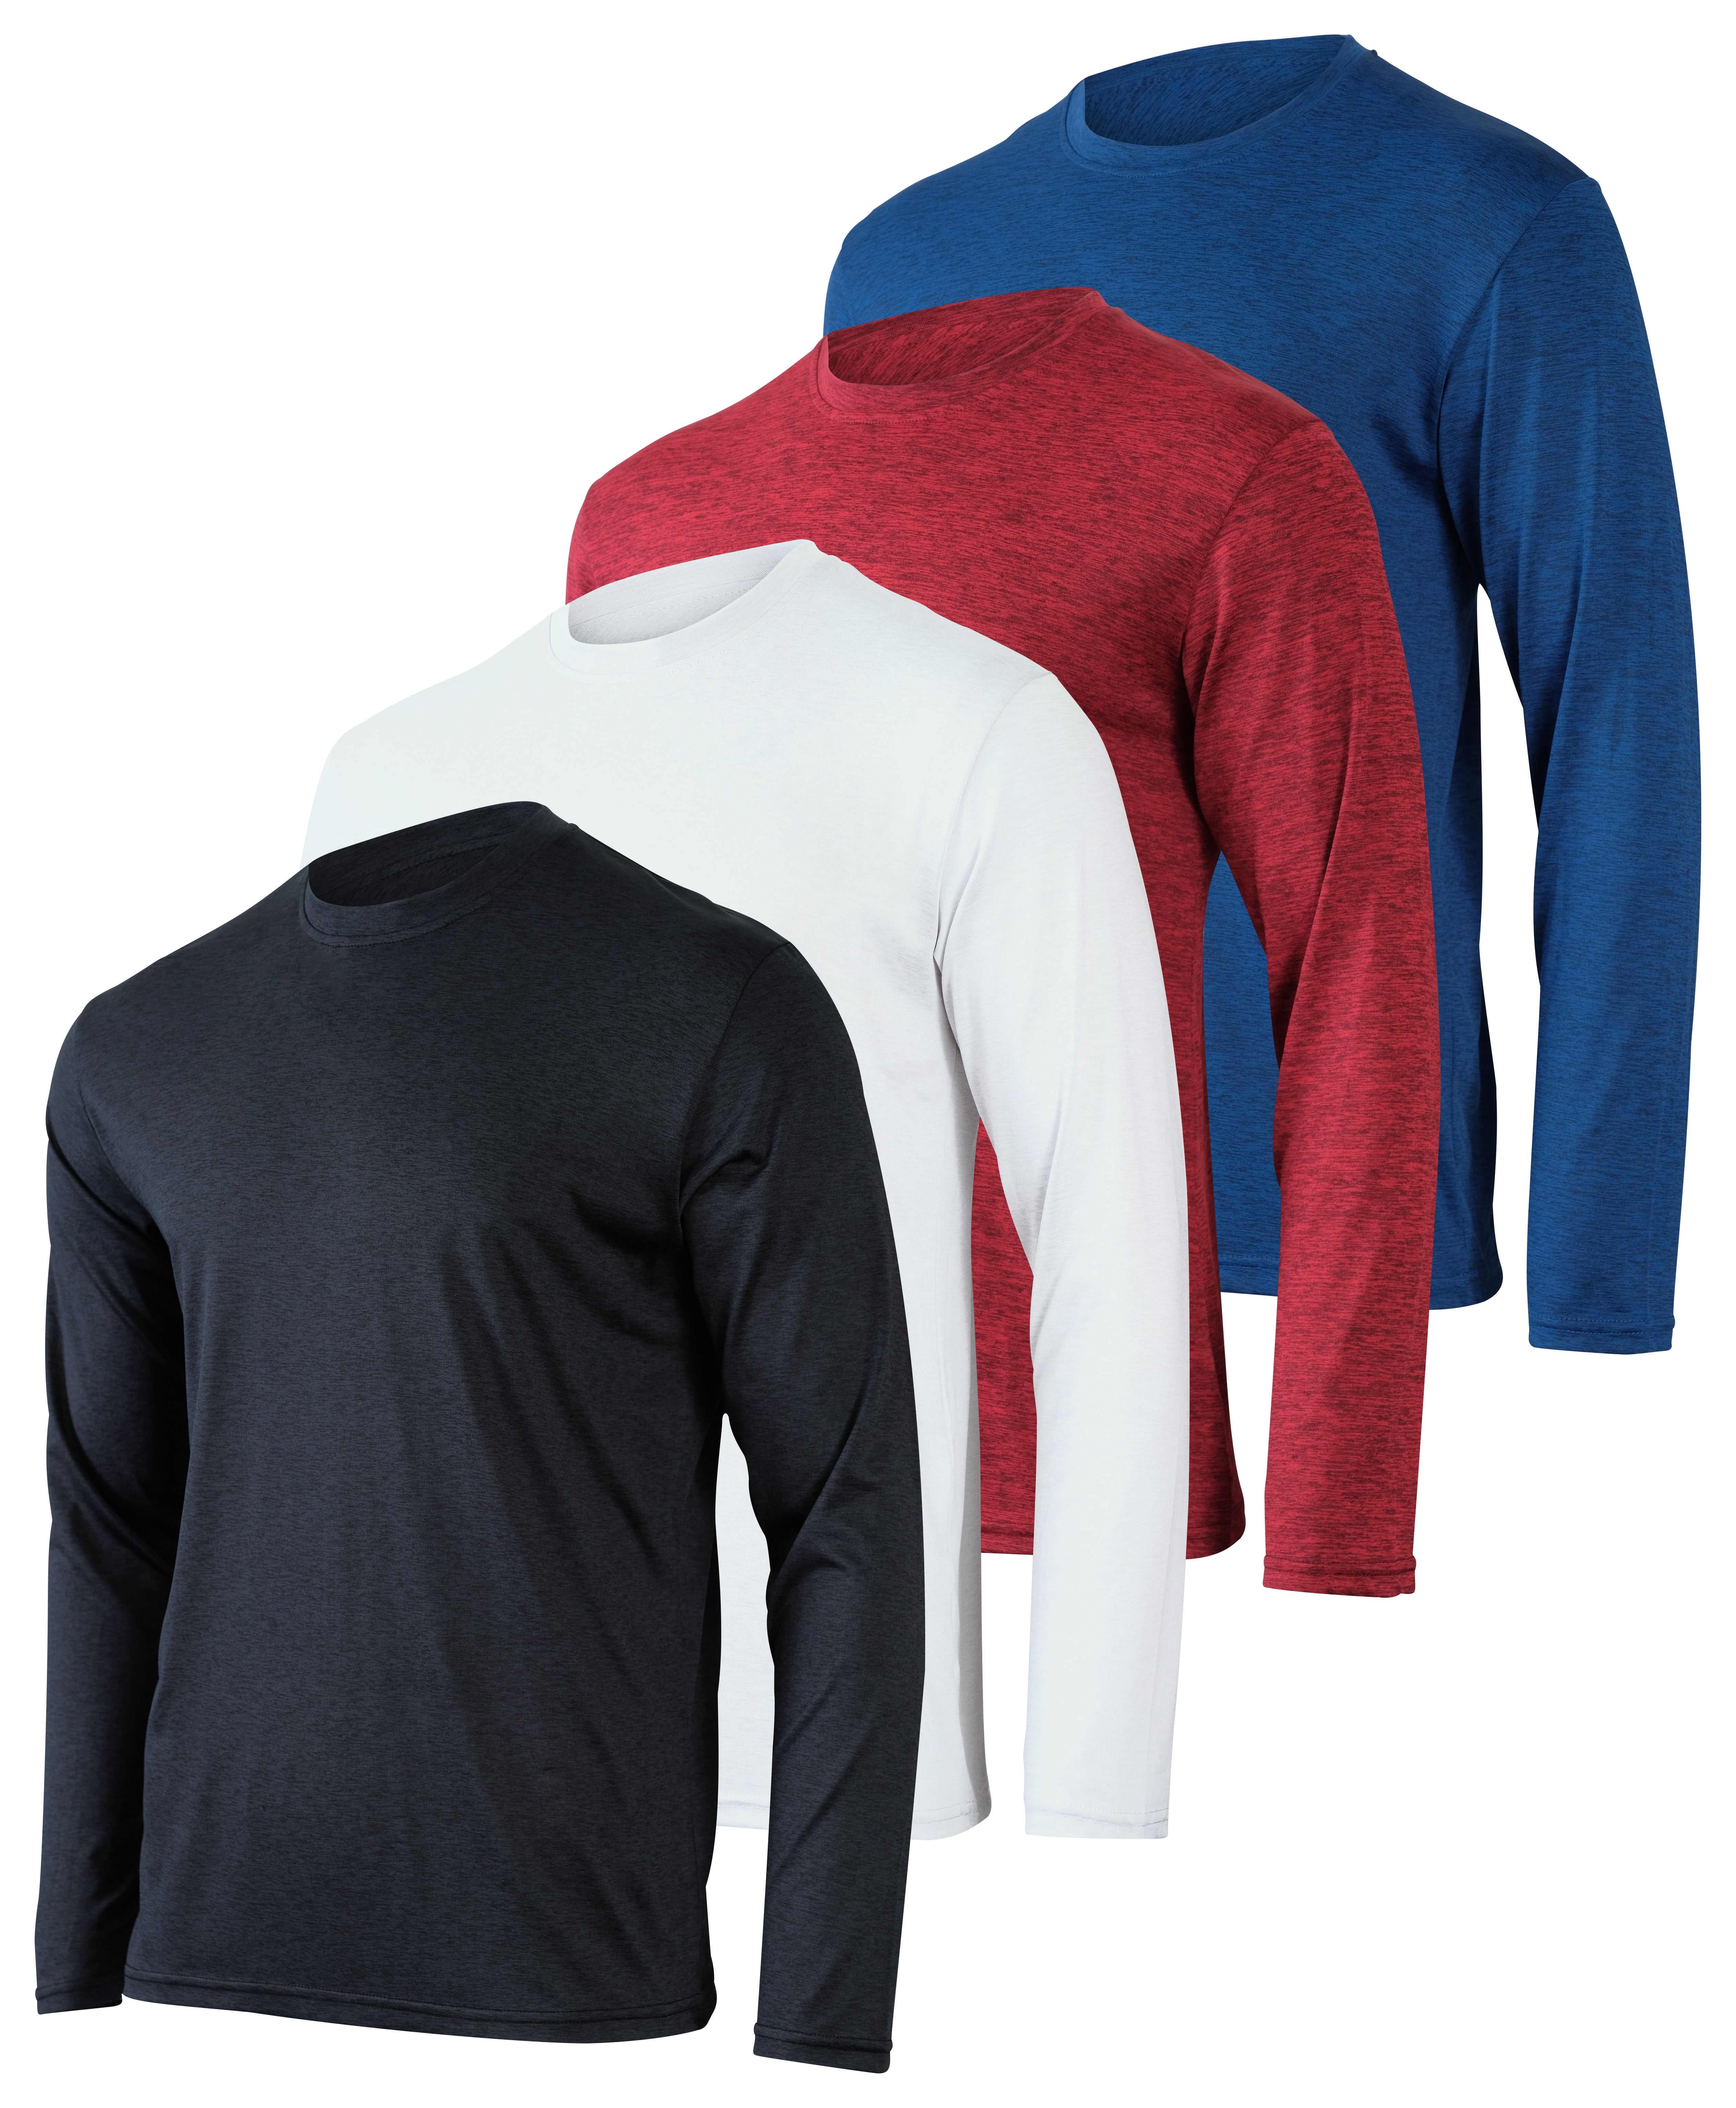 Real Essentials 4 Pack: Men's Dry-Fit Moisture Wicking Performance Long  Sleeve T-Shirt, UV Sun Protection Outdoor Active Top 